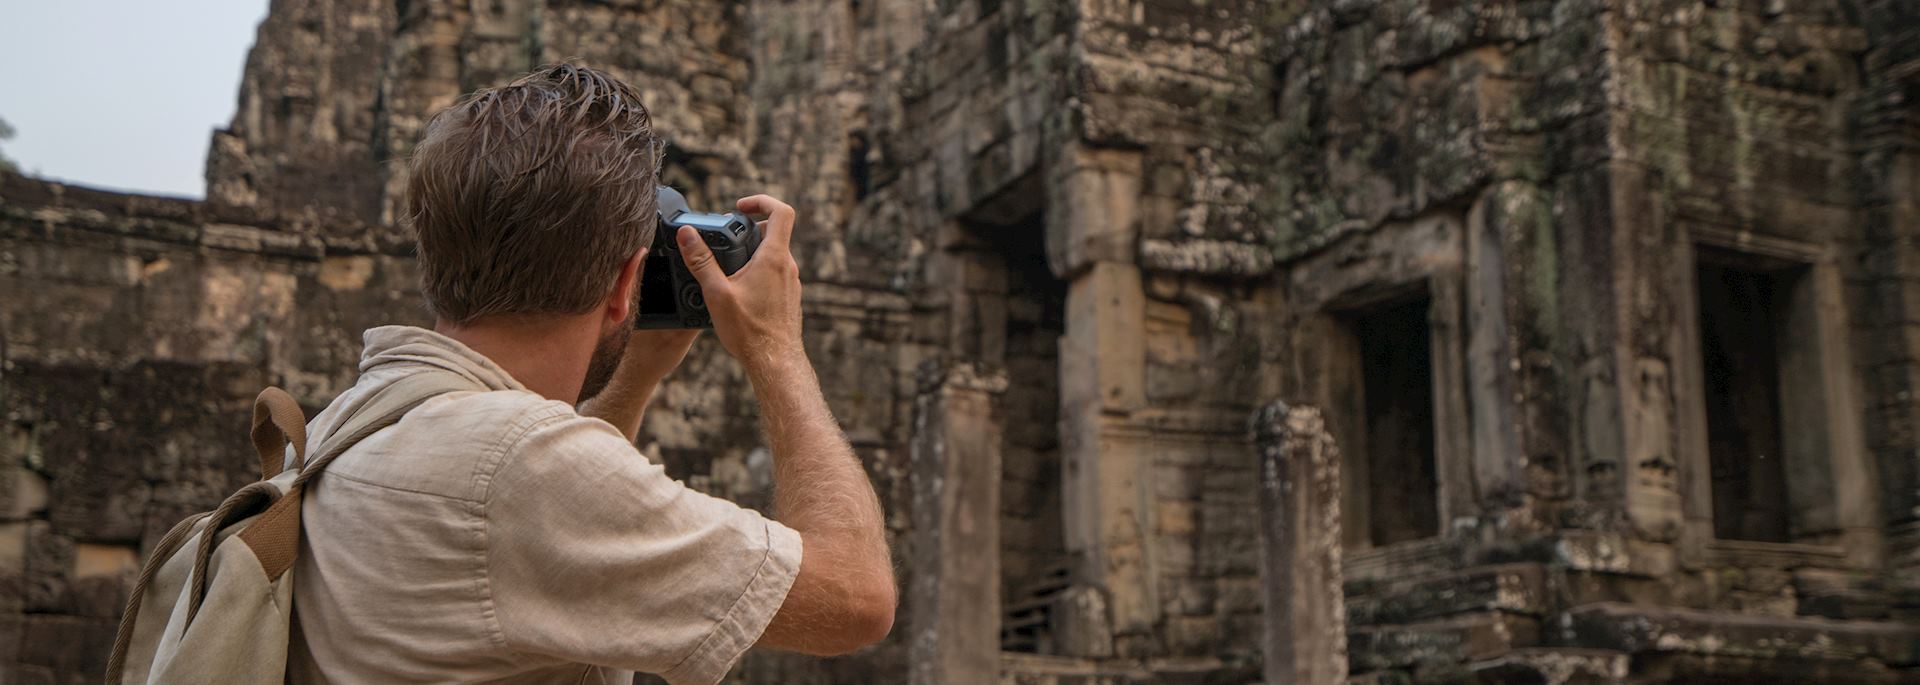 Photography at the Temples of Angkor